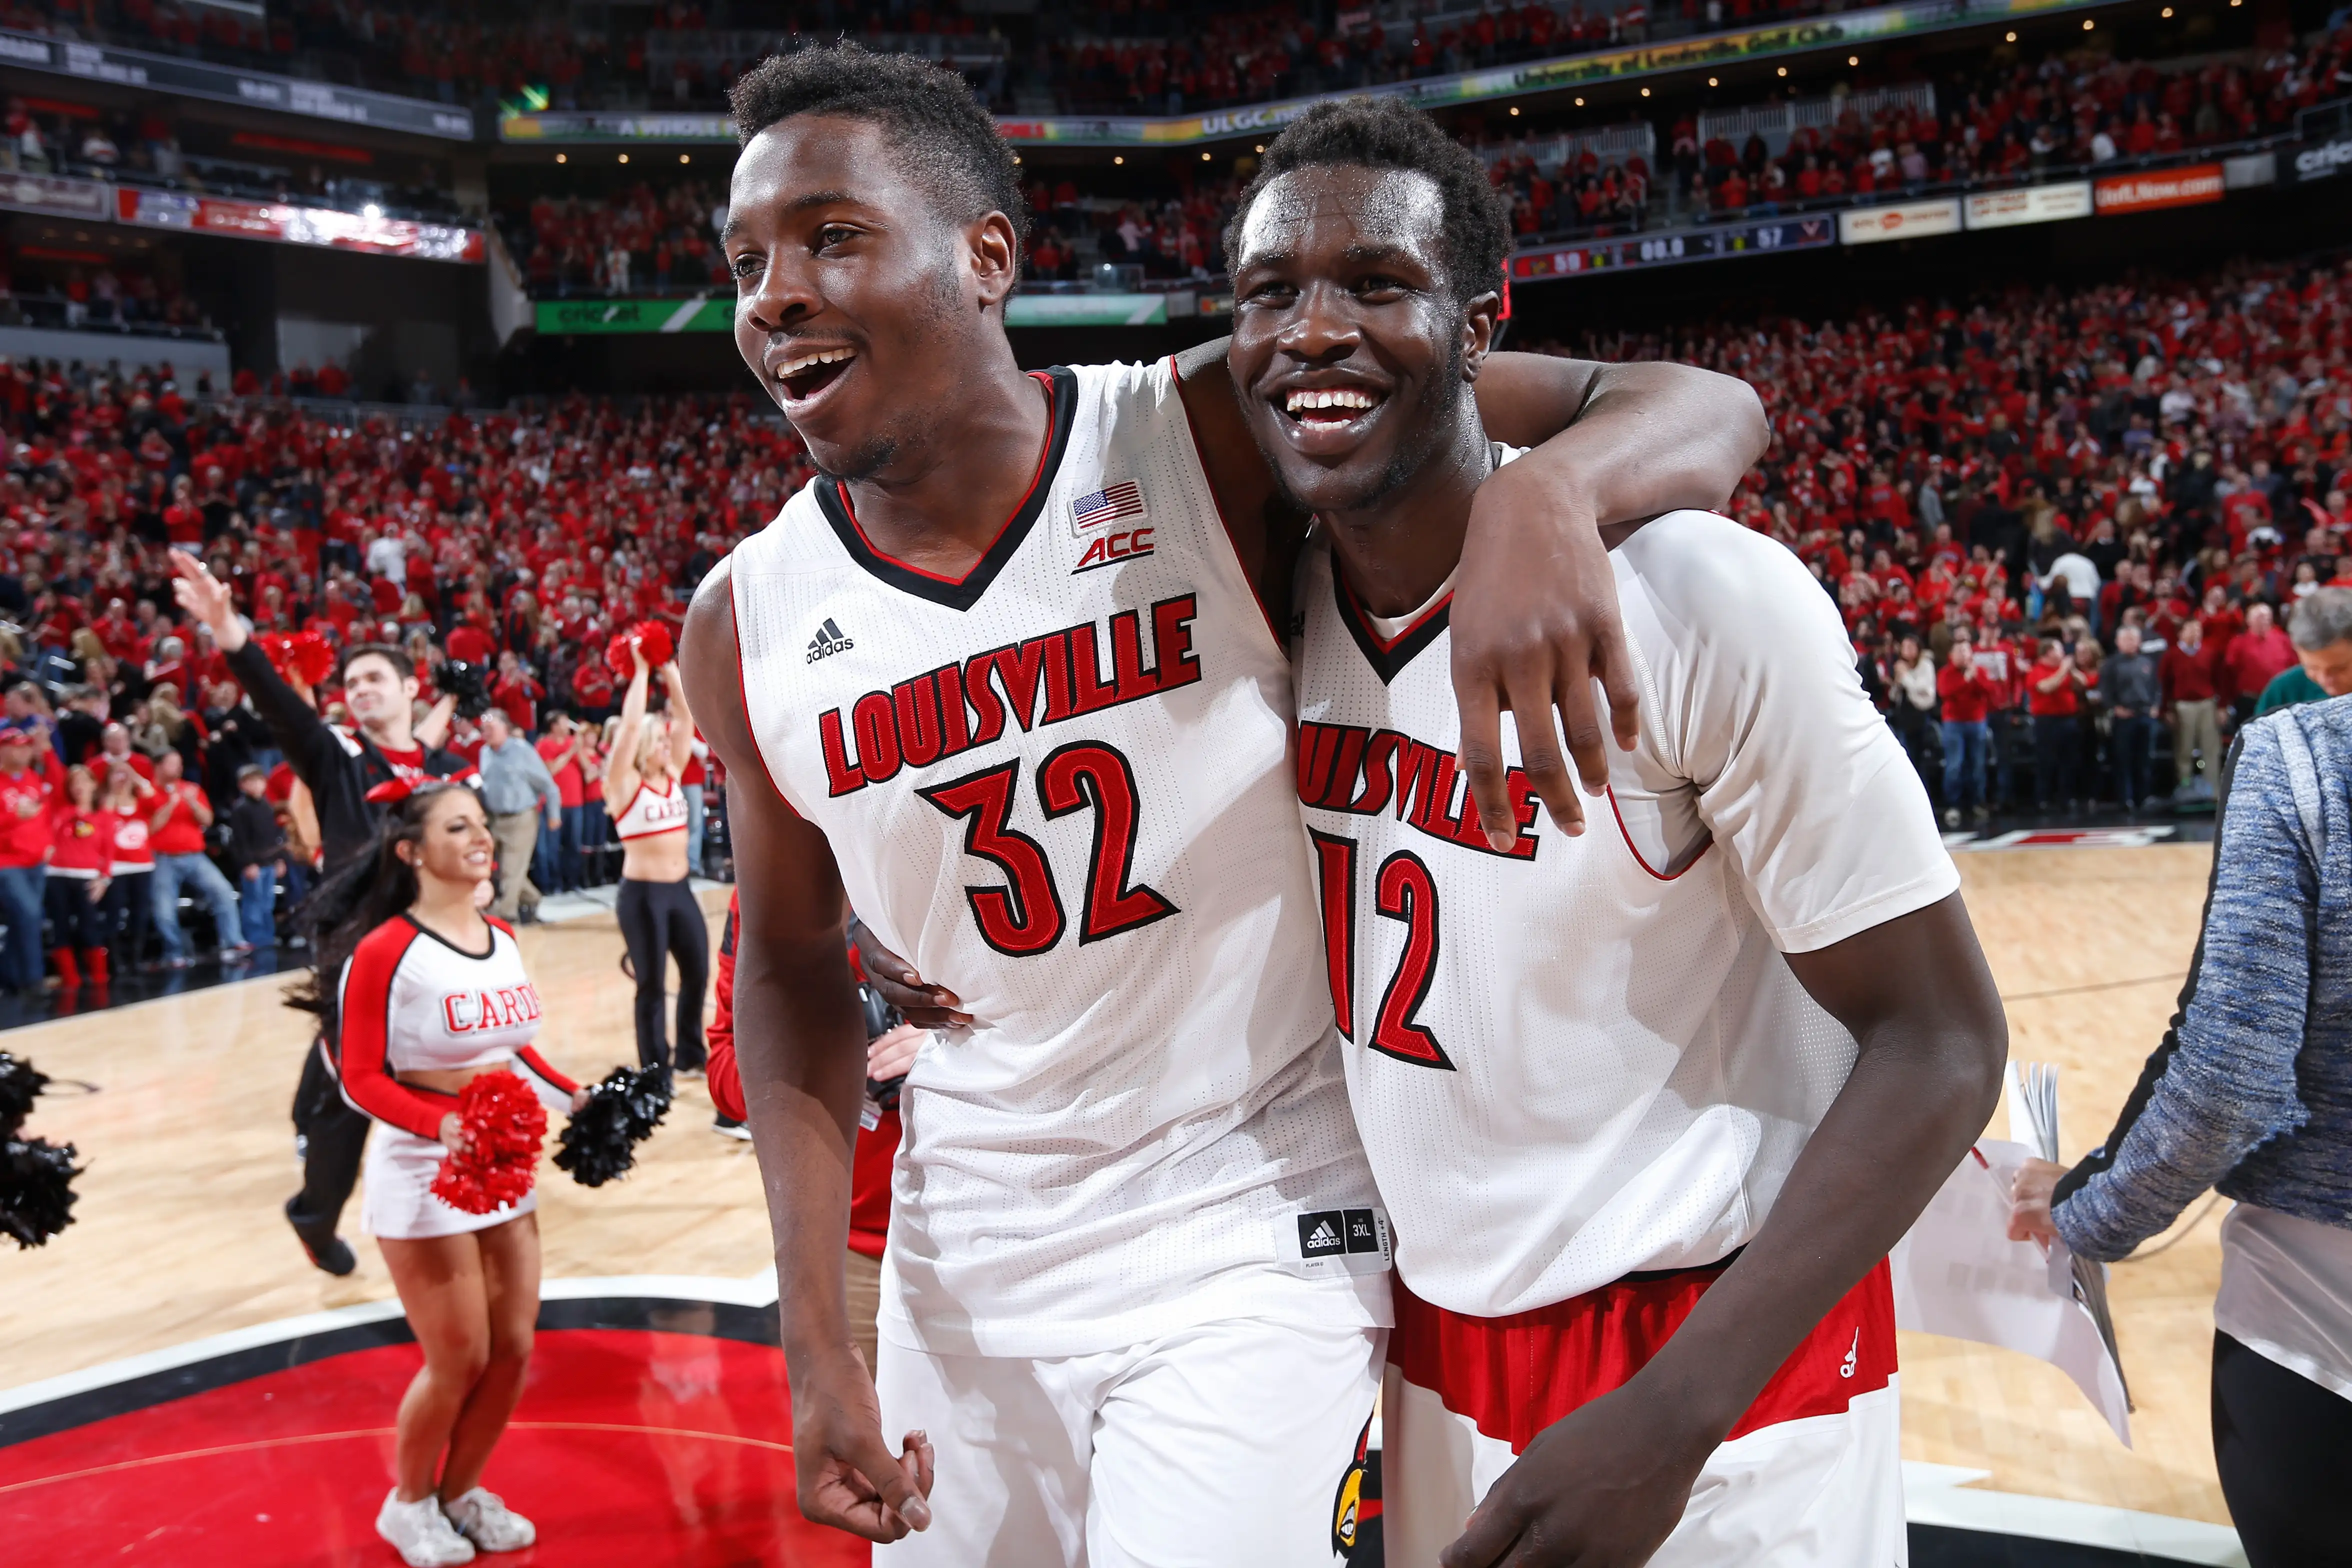 Mangok Mathiang #12 of the Louisville Cardinals celebrates his winning basket with teammate Chinanu Onuaku #32 after the game against the Virginia Cavaliers at KFC Yum! Center on March 7, 2015 in Louisville, Kentucky. Louisville defeated Virginia 59-57.